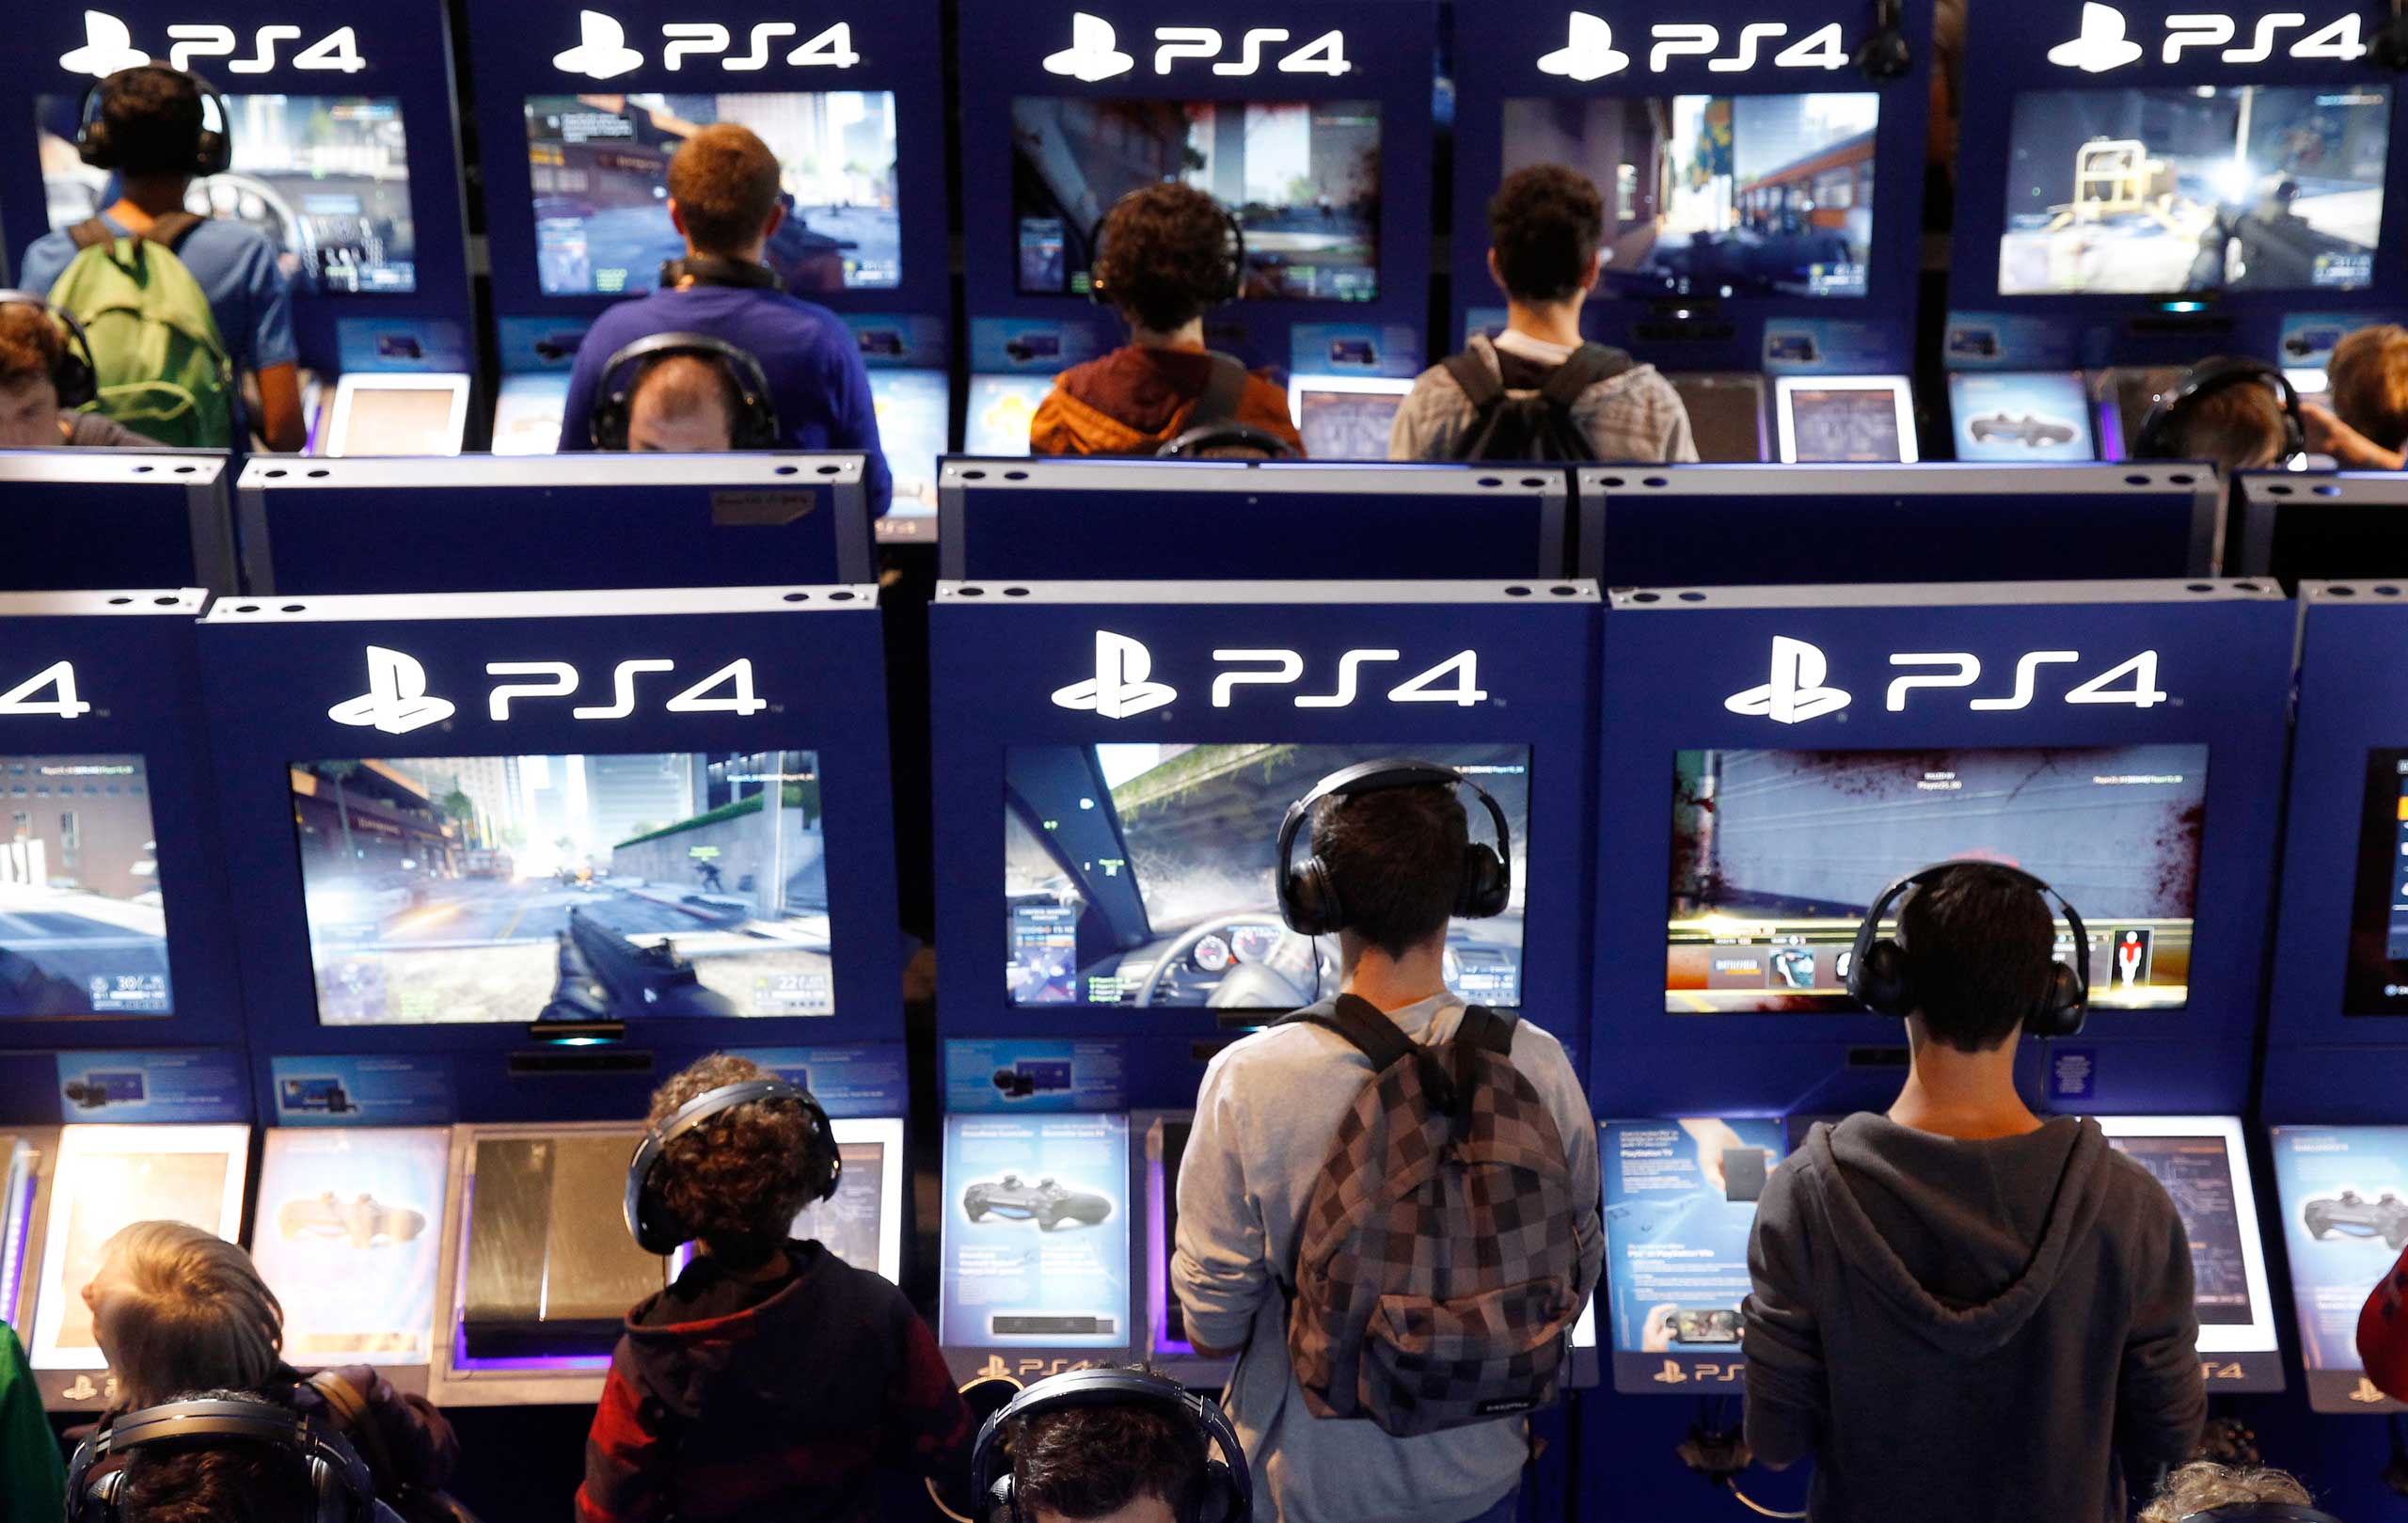 Gamers play video games with the PS4 consoles of PlayStation during the International Games Week on Oct. 29, 2014, in Paris (Chesnot—Getty Images)